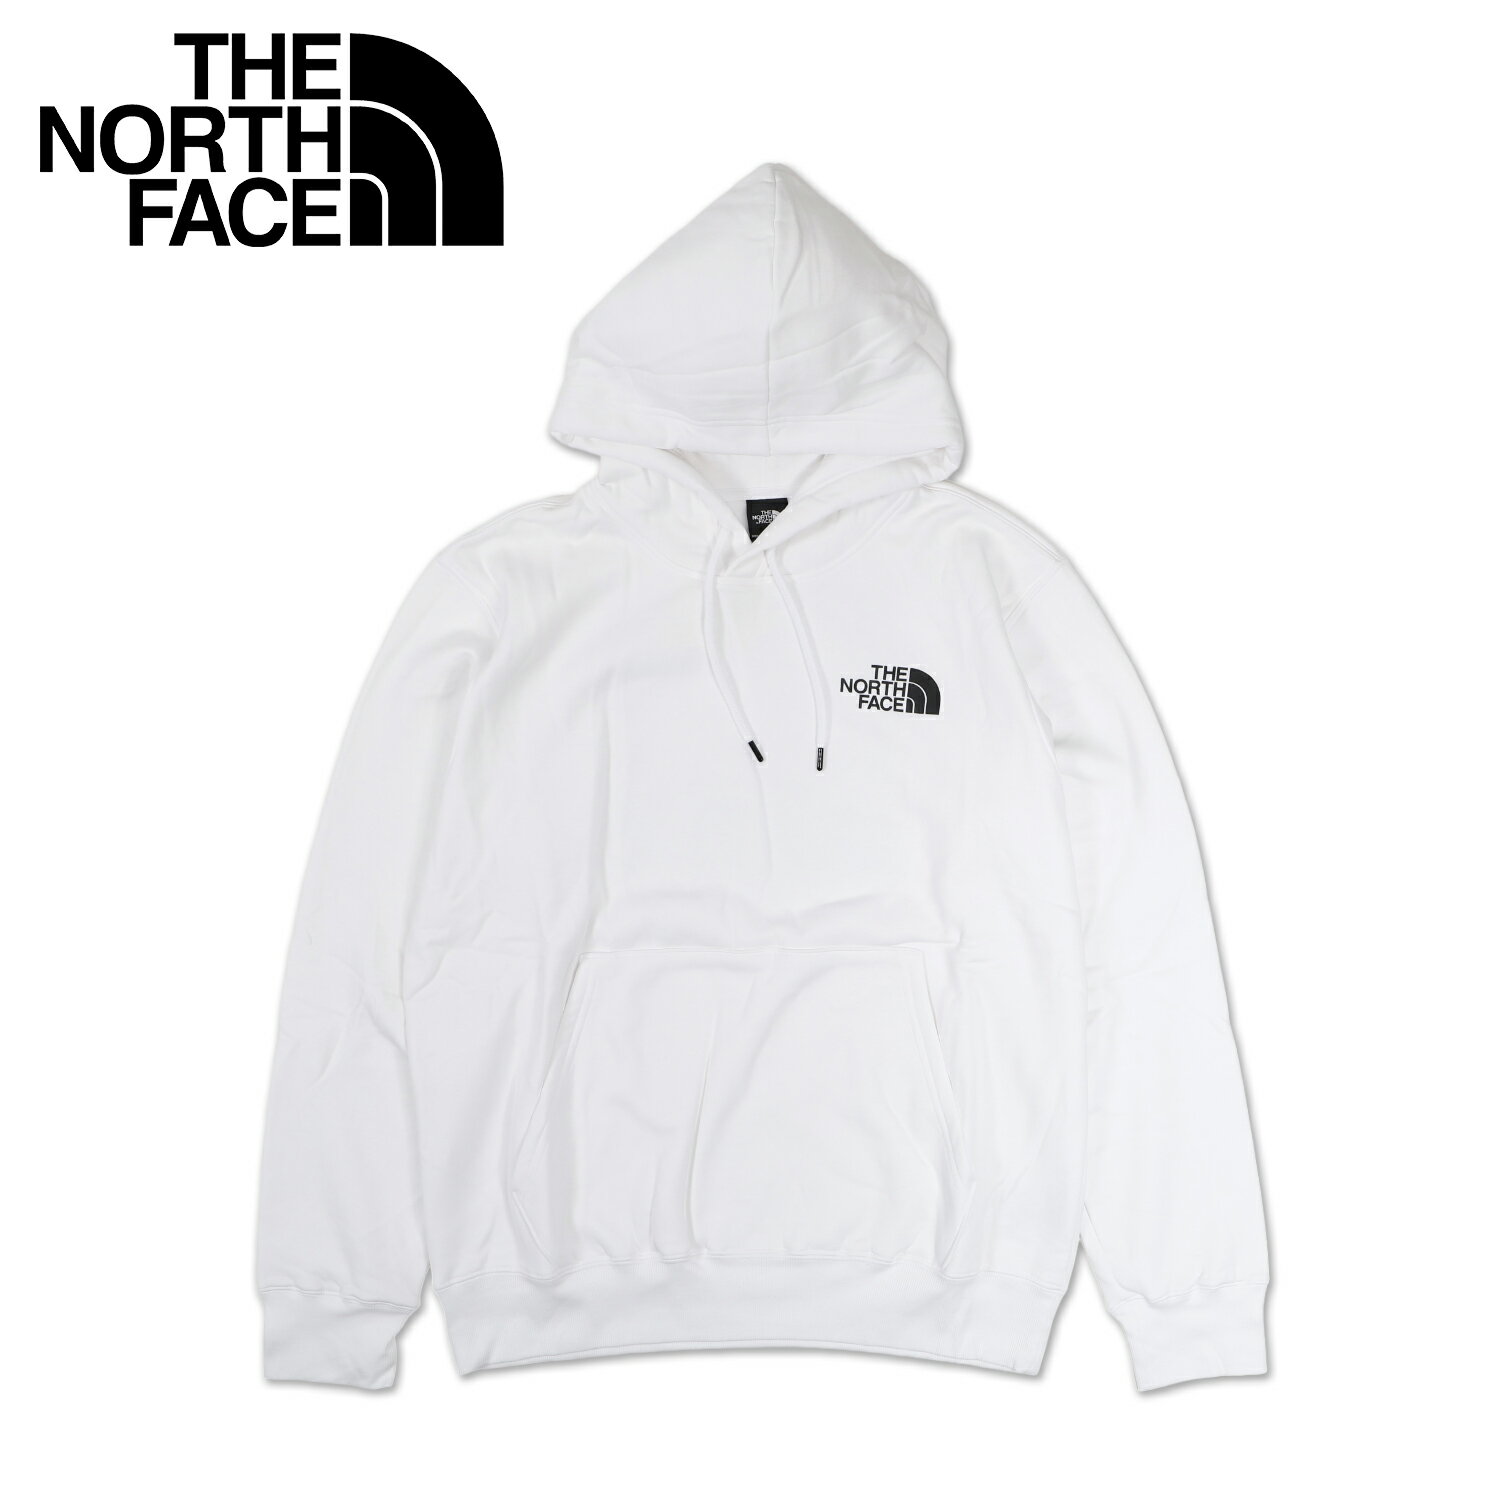 ں1000OFFݥ THE NORTH FACE Ρե ѡ ץ륪С աǥ  ɴ BOX NSE PULLOVER HOODIE ۥ磻  NF0A7UNS